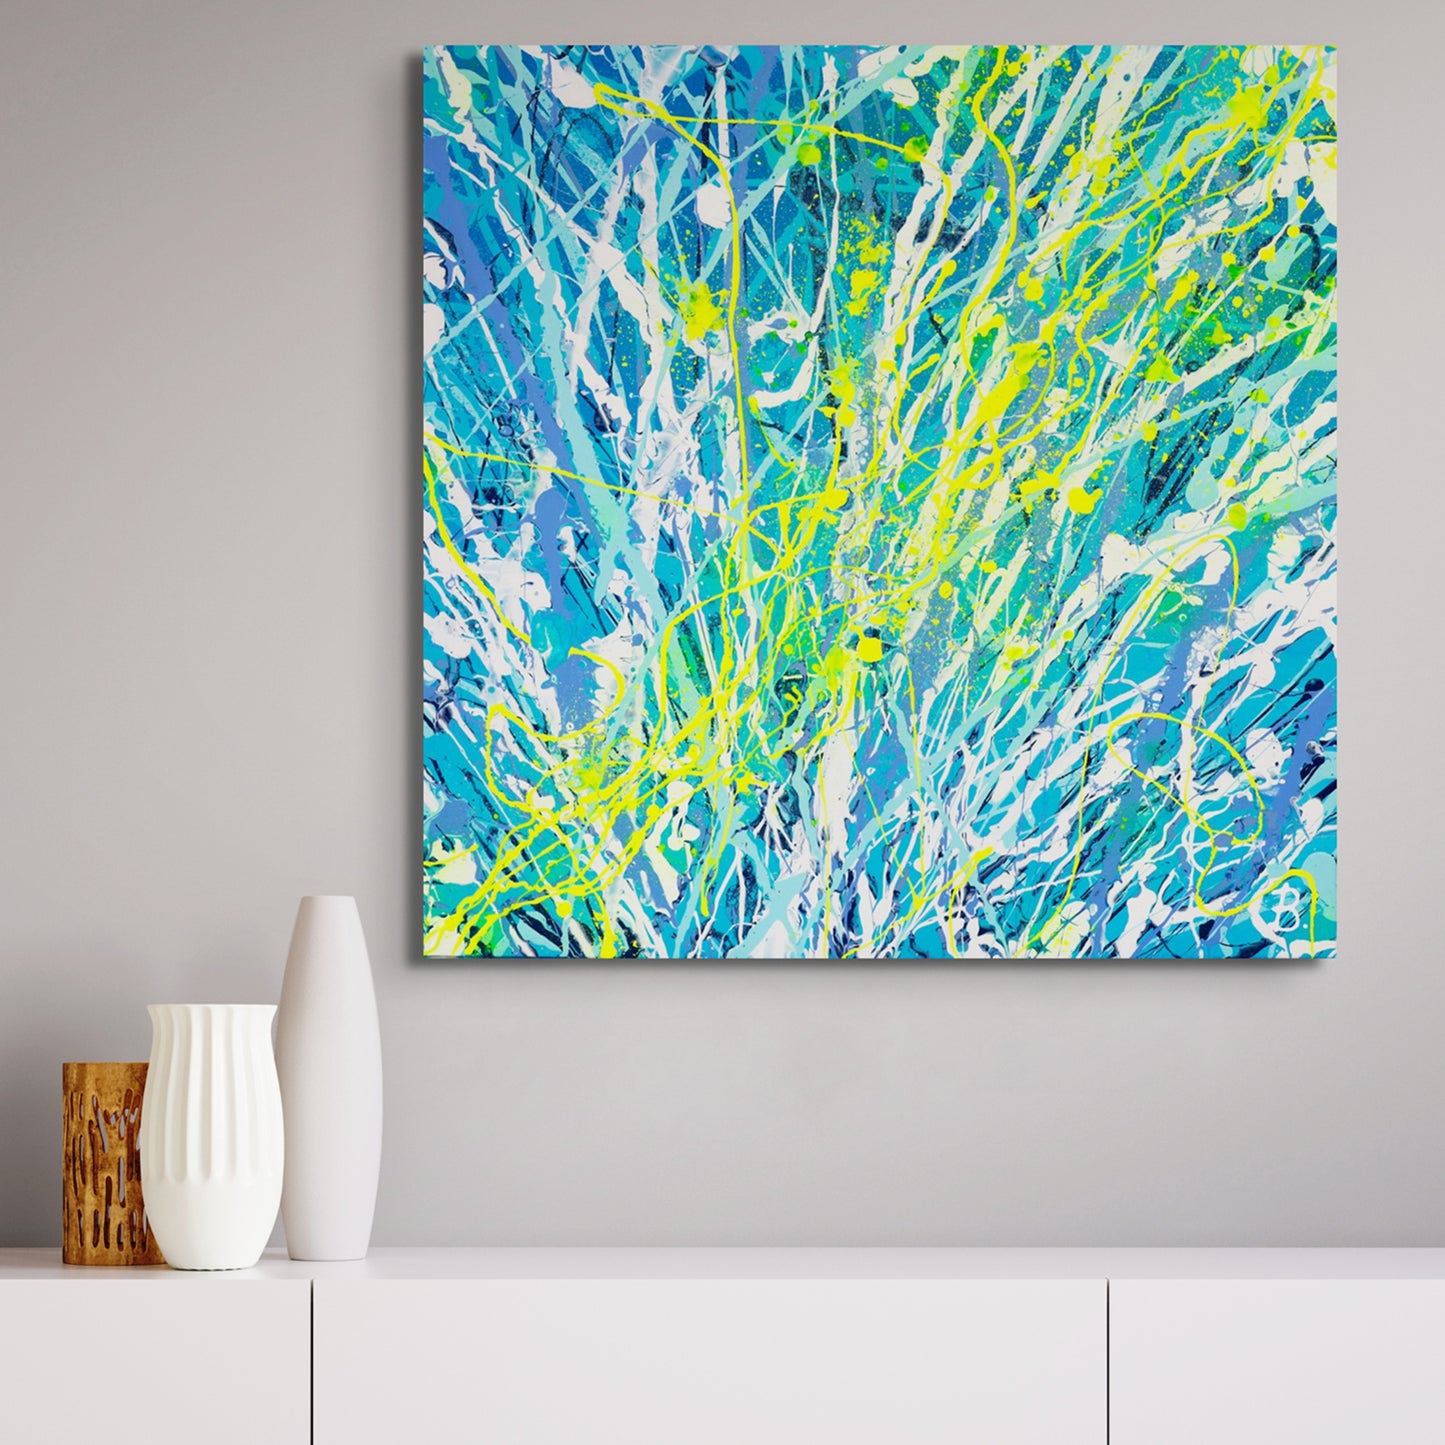 'Luminescence' Original Abstract Expressionism Painting on Canvas seen hanging  above console near vases. Hand painted by Bridget Bradley, Original Abstract Expressionist Artist, Queensland Australia 